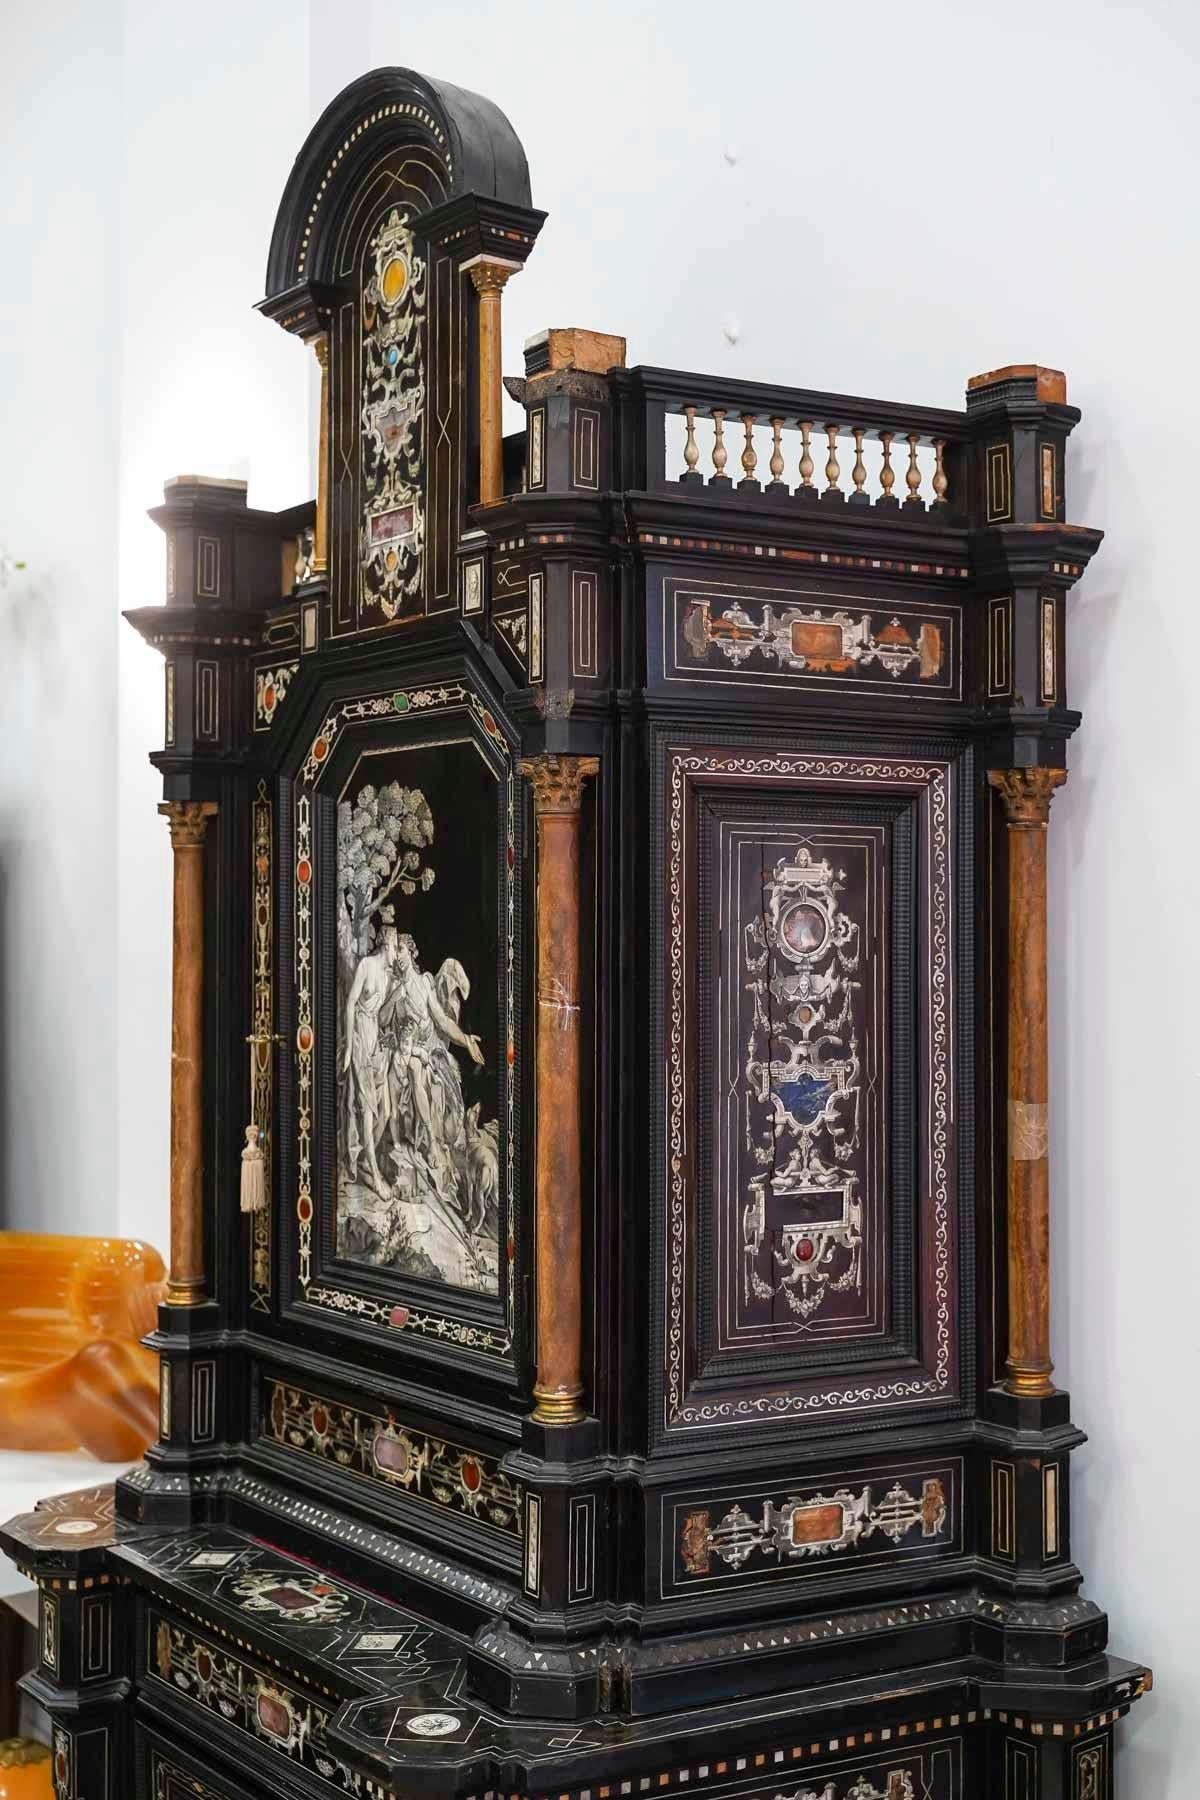 18th Century Italian Cabinet in Ebony, Ivory, Hard Stone Inlay, Secret Drawers.

18th century Italian cabinet in ebony, ivory, hard stone inlay, secret drawers. Lack and restoration to be expected, sold as is.
h: 250cm, w: 120cm, d: 63cm